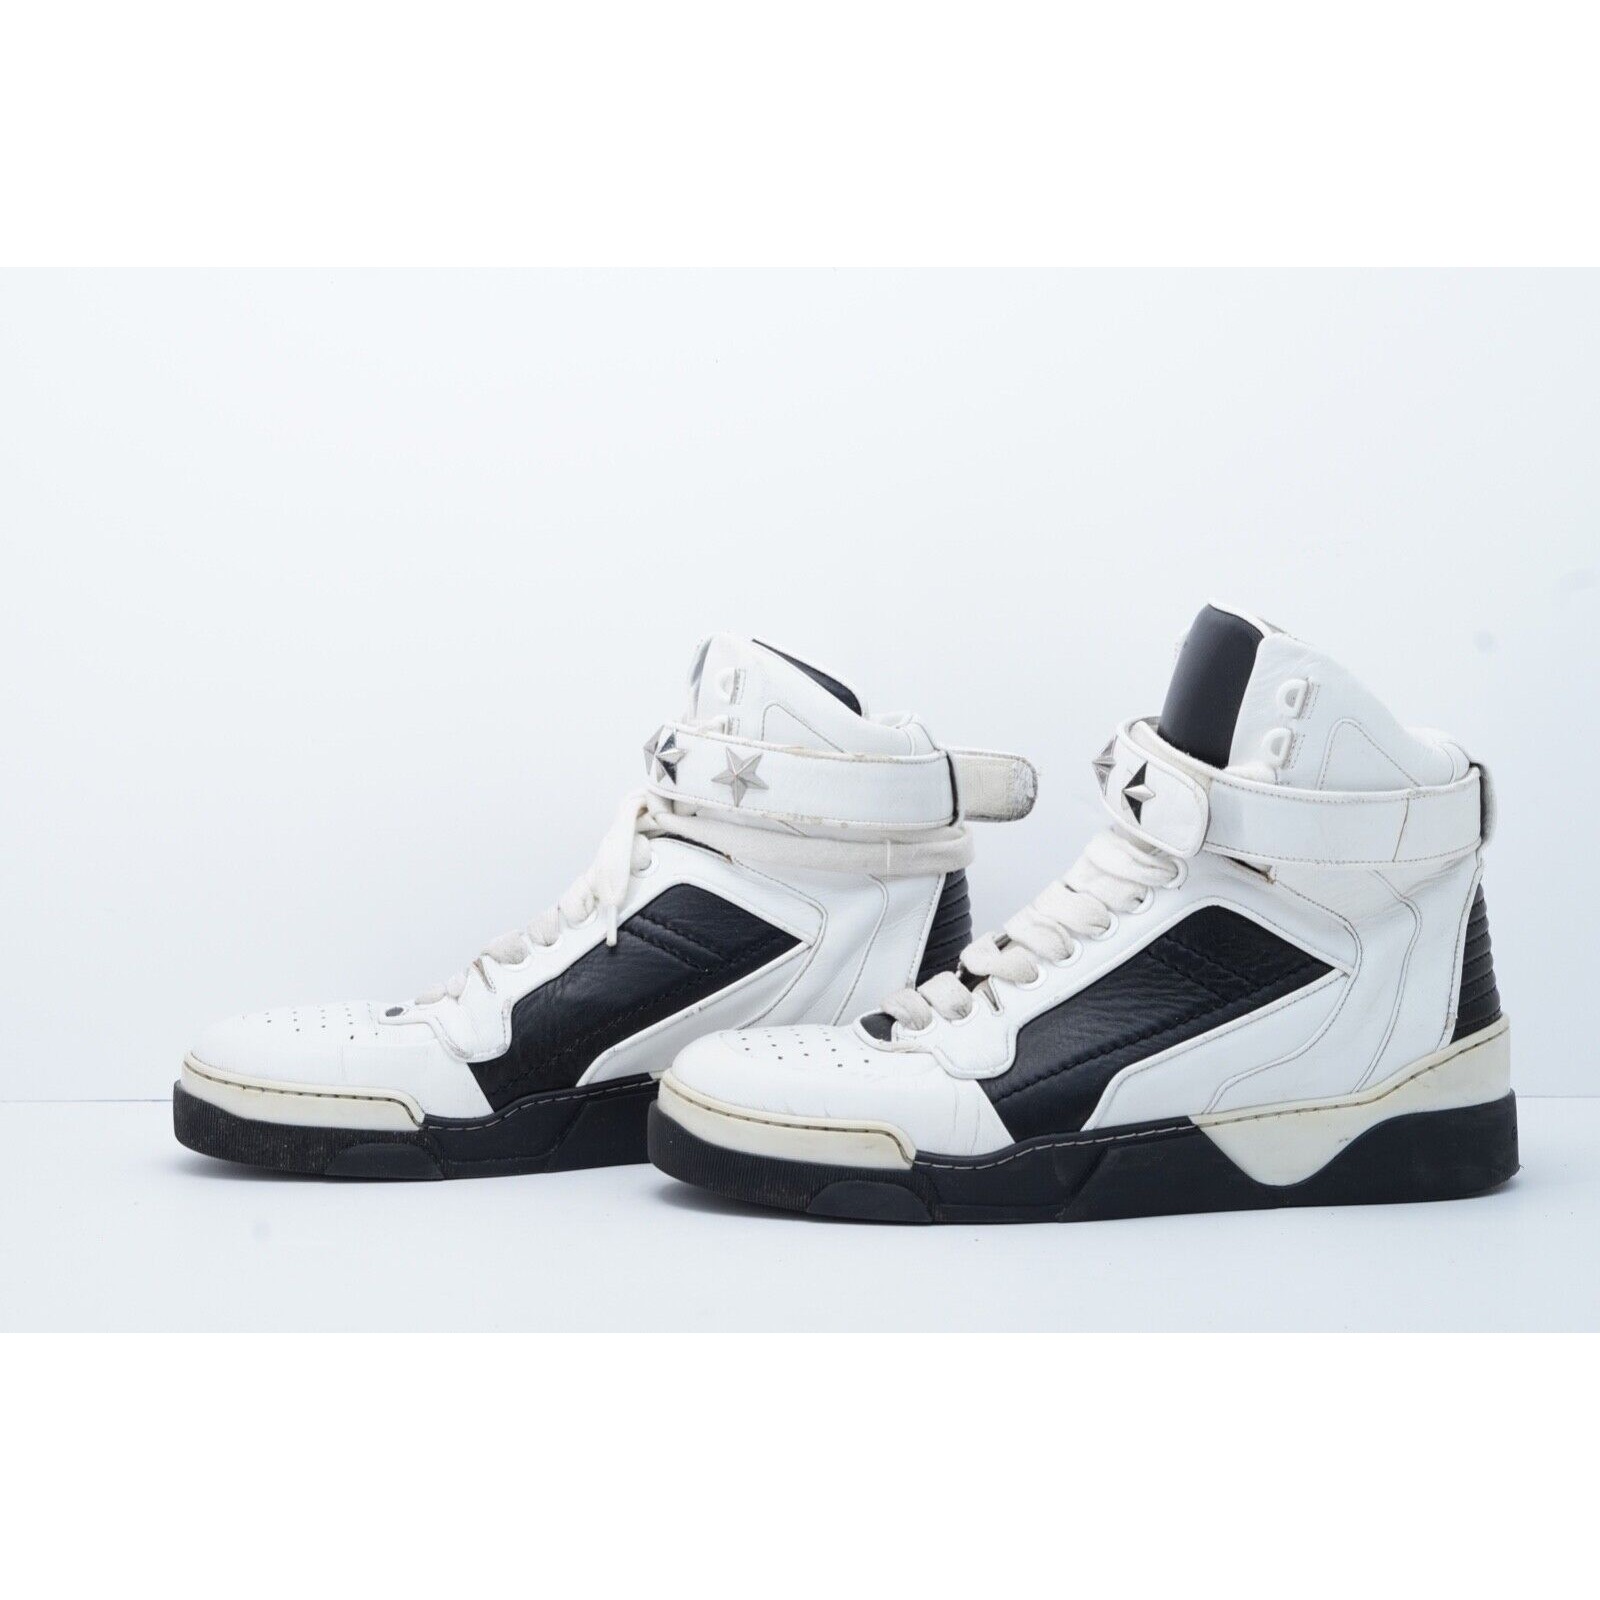 Givenchy Tyson Star Sneakers Shoes White Leather High Top 44 - 8